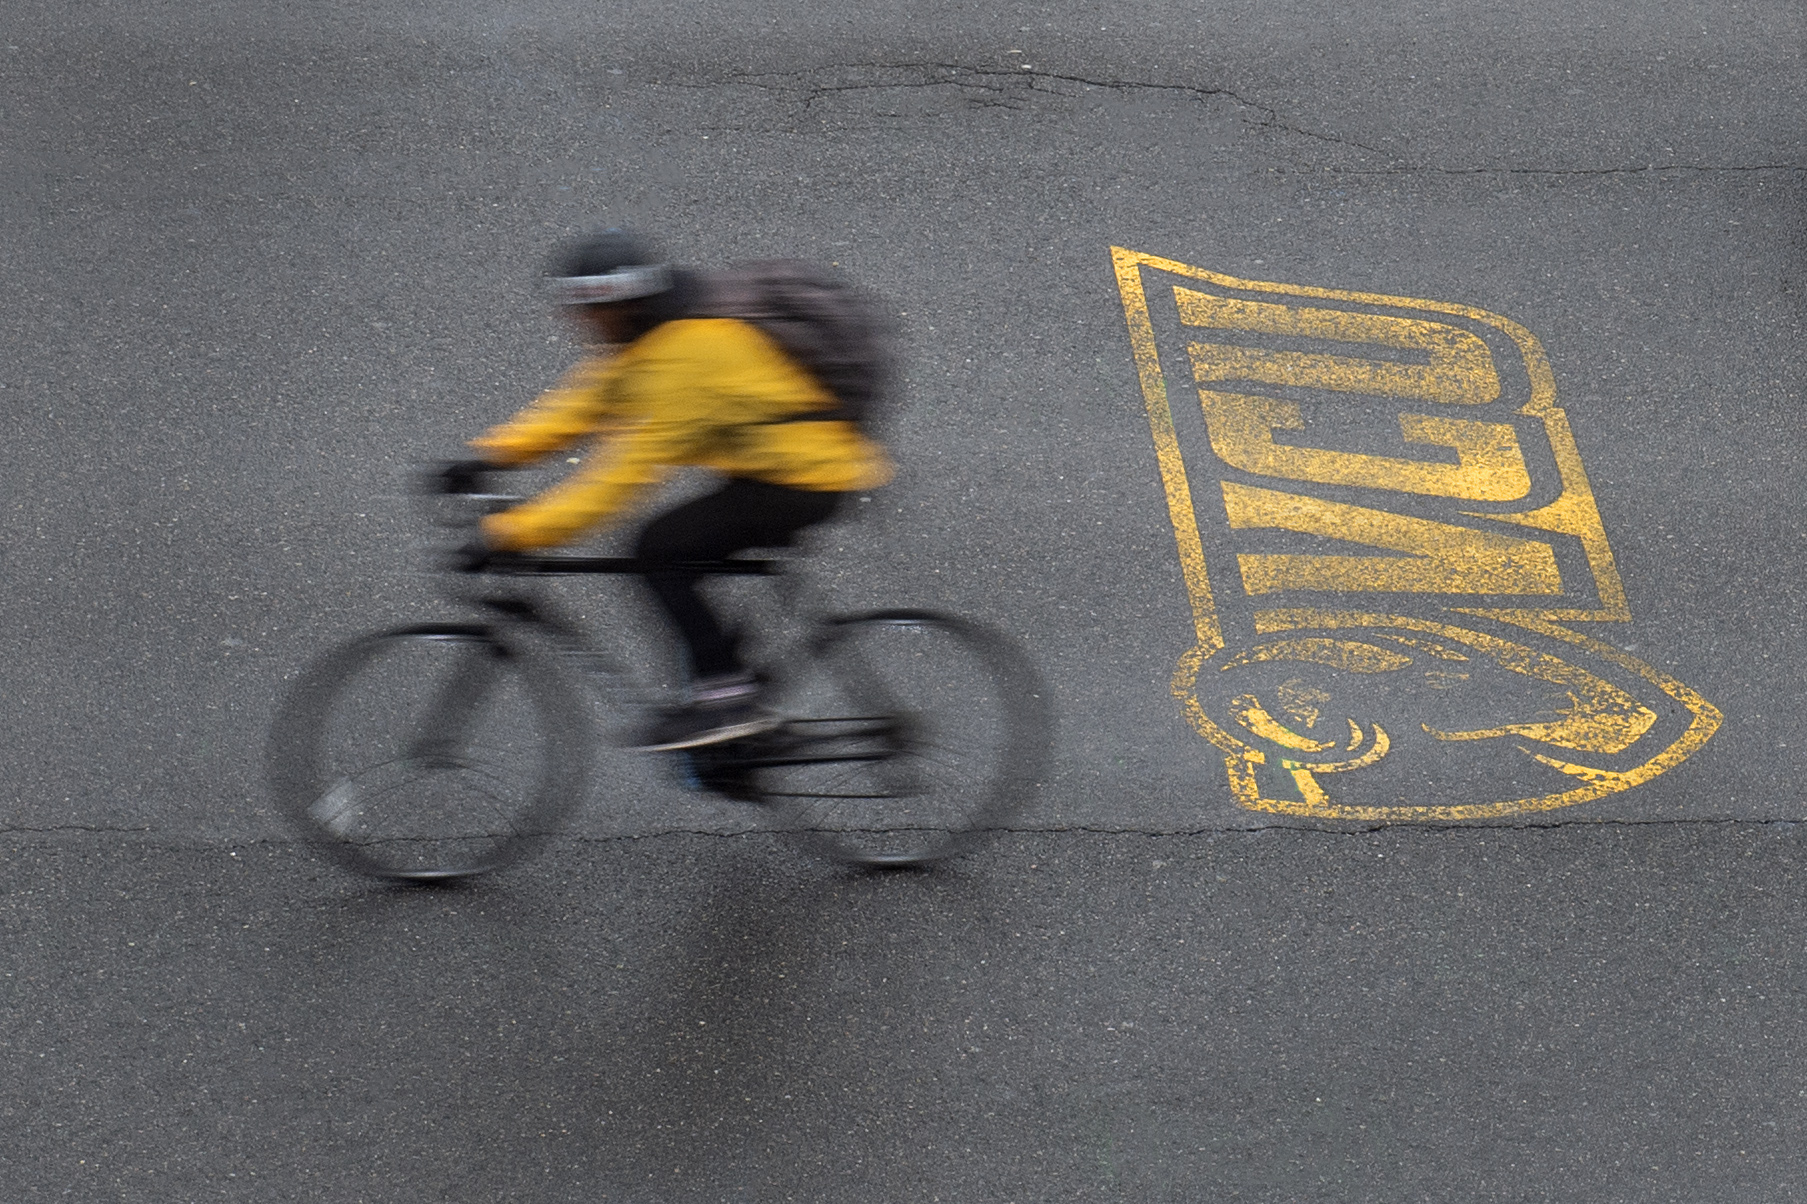 Person on bike with VCU logo painted on the pavement